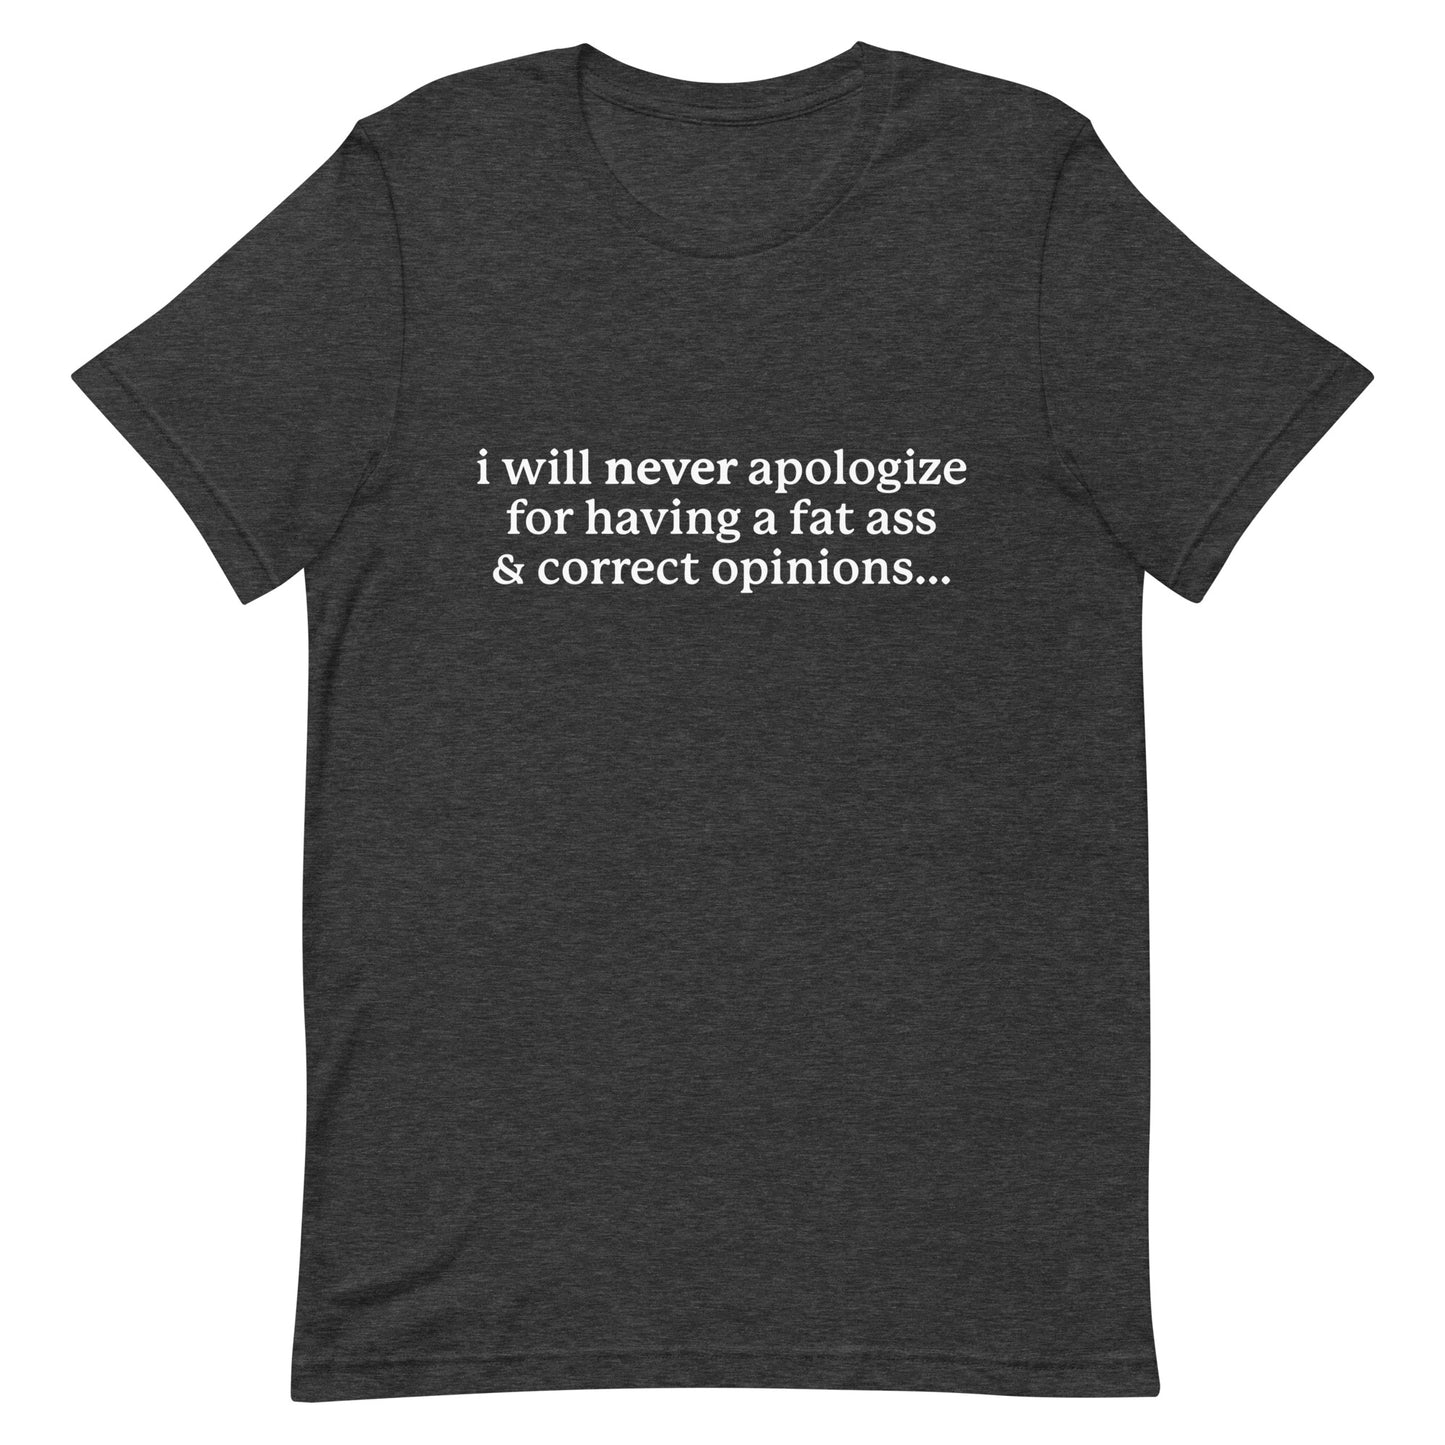 I Will Never Apologize (Fat Ass & Correct Opinions) Unisex t-shirt